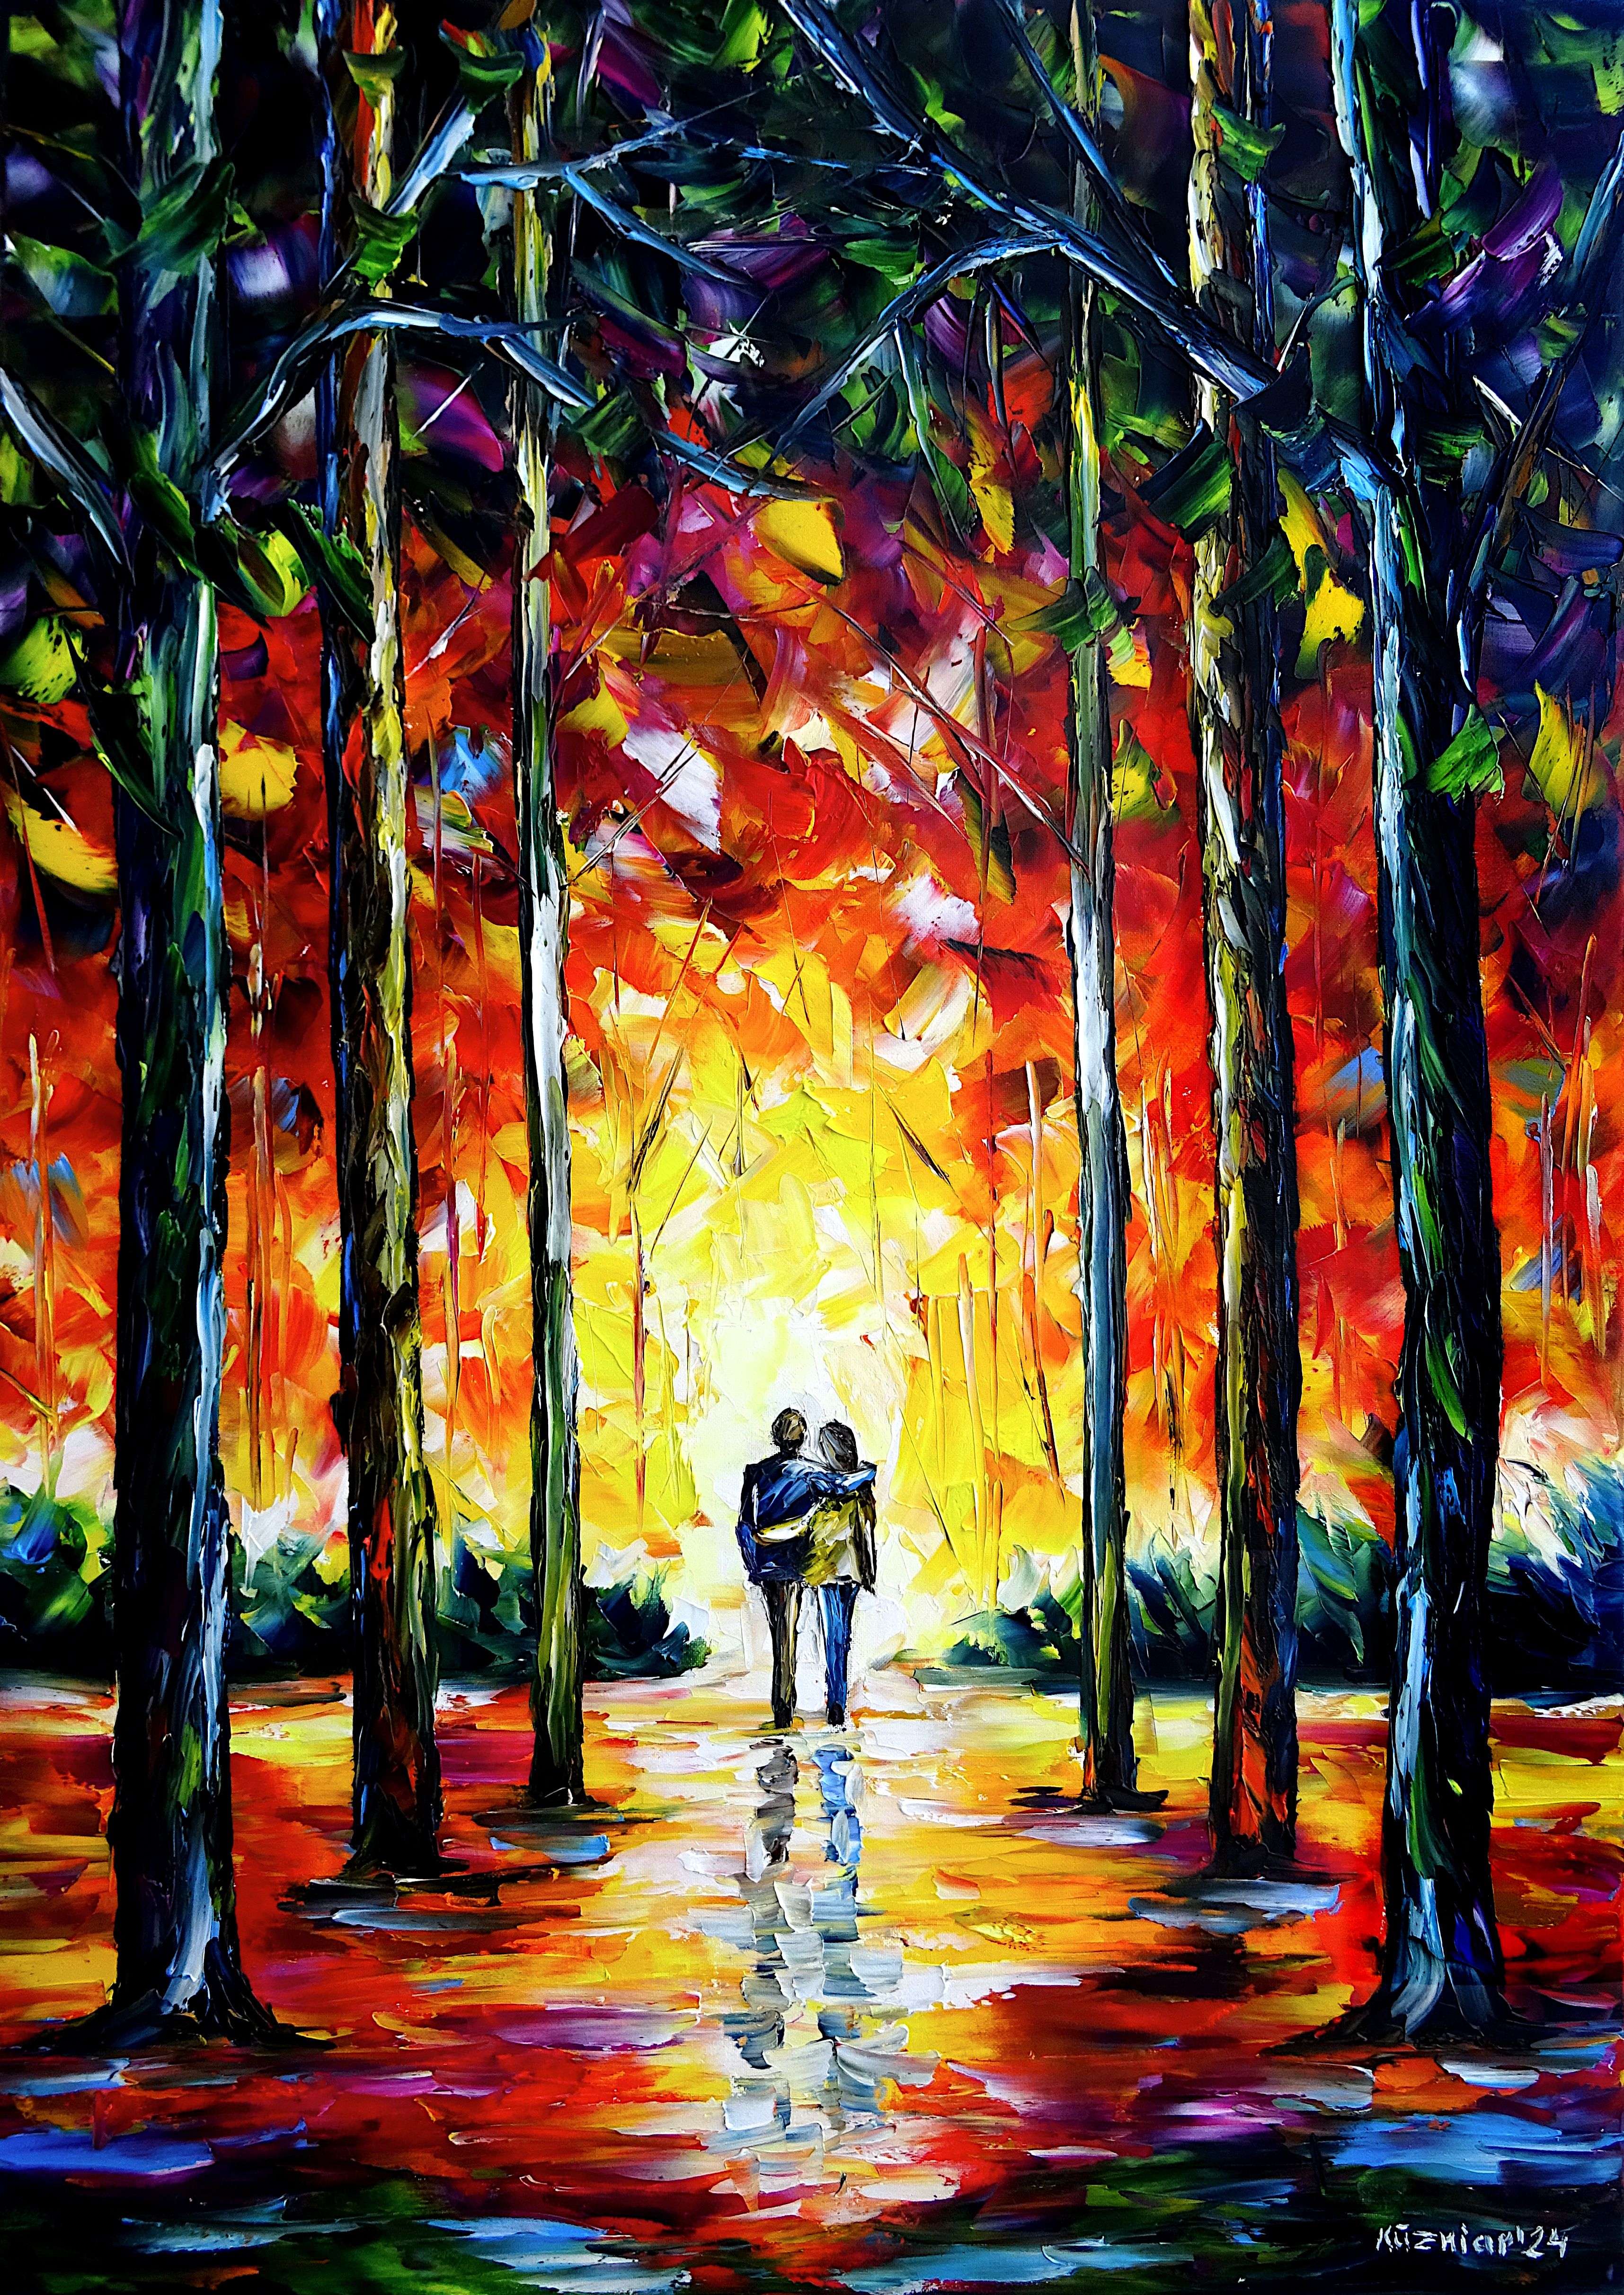 park walk,lovers in the park,park in the evening,sunset,people in love,lovers hugging,hugging walk,park romance,romantic scene,evening light,evening sun,romantic,love and romance,couple in love,burning sun,red park landscape,park abstract,red yellow and green,evening walk,romantic evening,pink colors,pink landscape,peaceful picture,nice time,people in the light,palette knife oil painting,expressive art,expressive painting,expressionism,lively colors,colorful painting,impasto painting,figurative